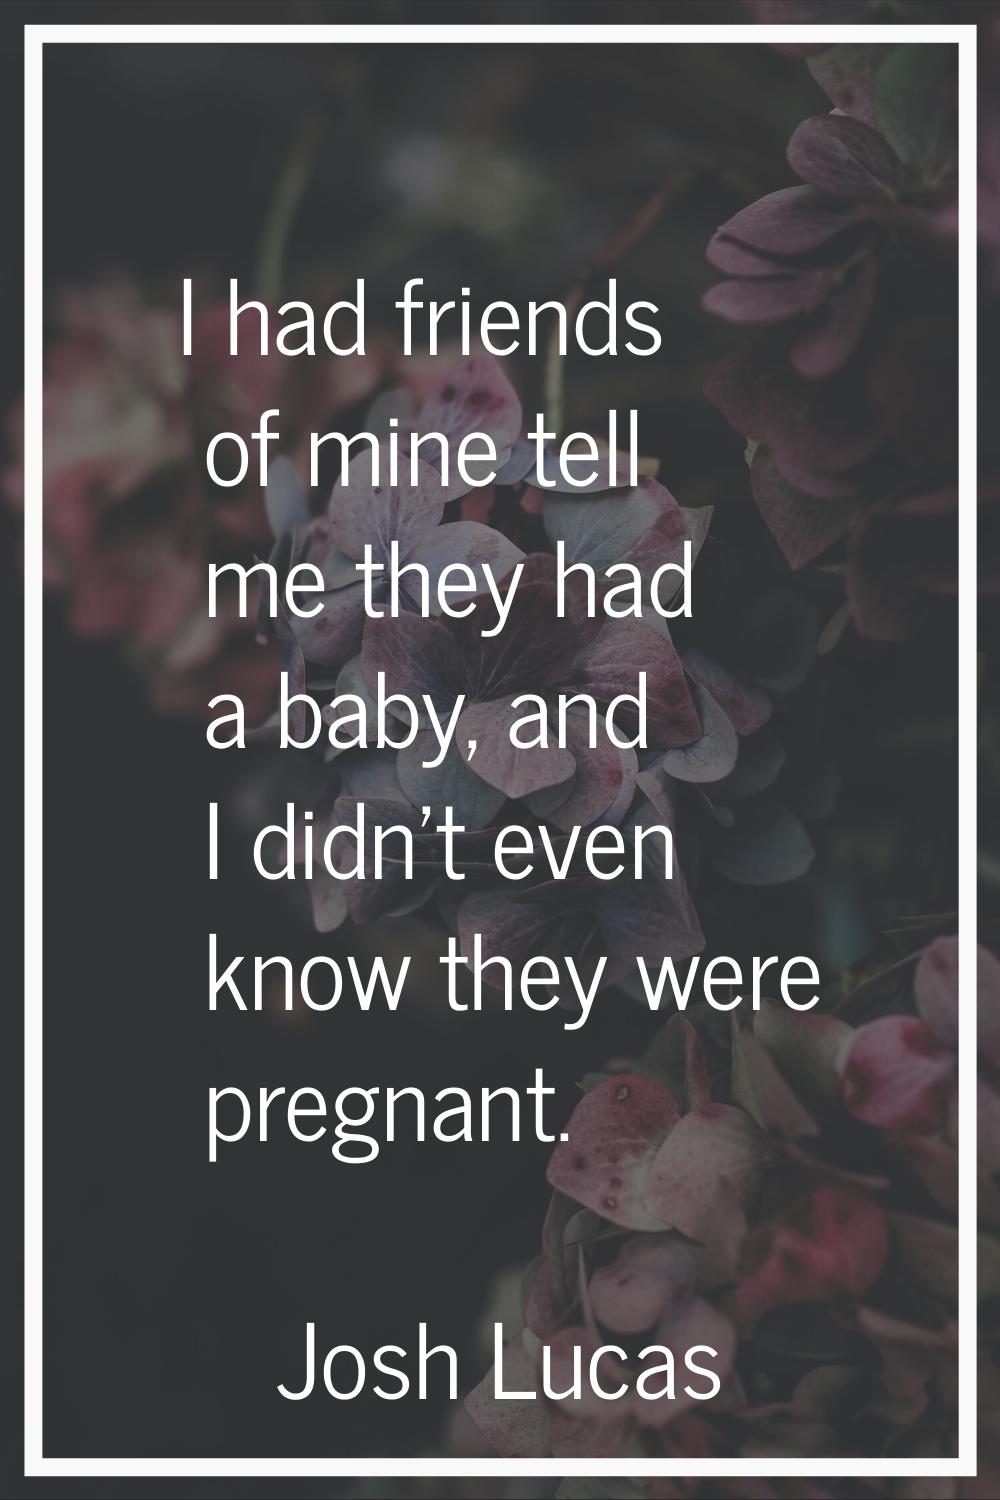 I had friends of mine tell me they had a baby, and I didn't even know they were pregnant.